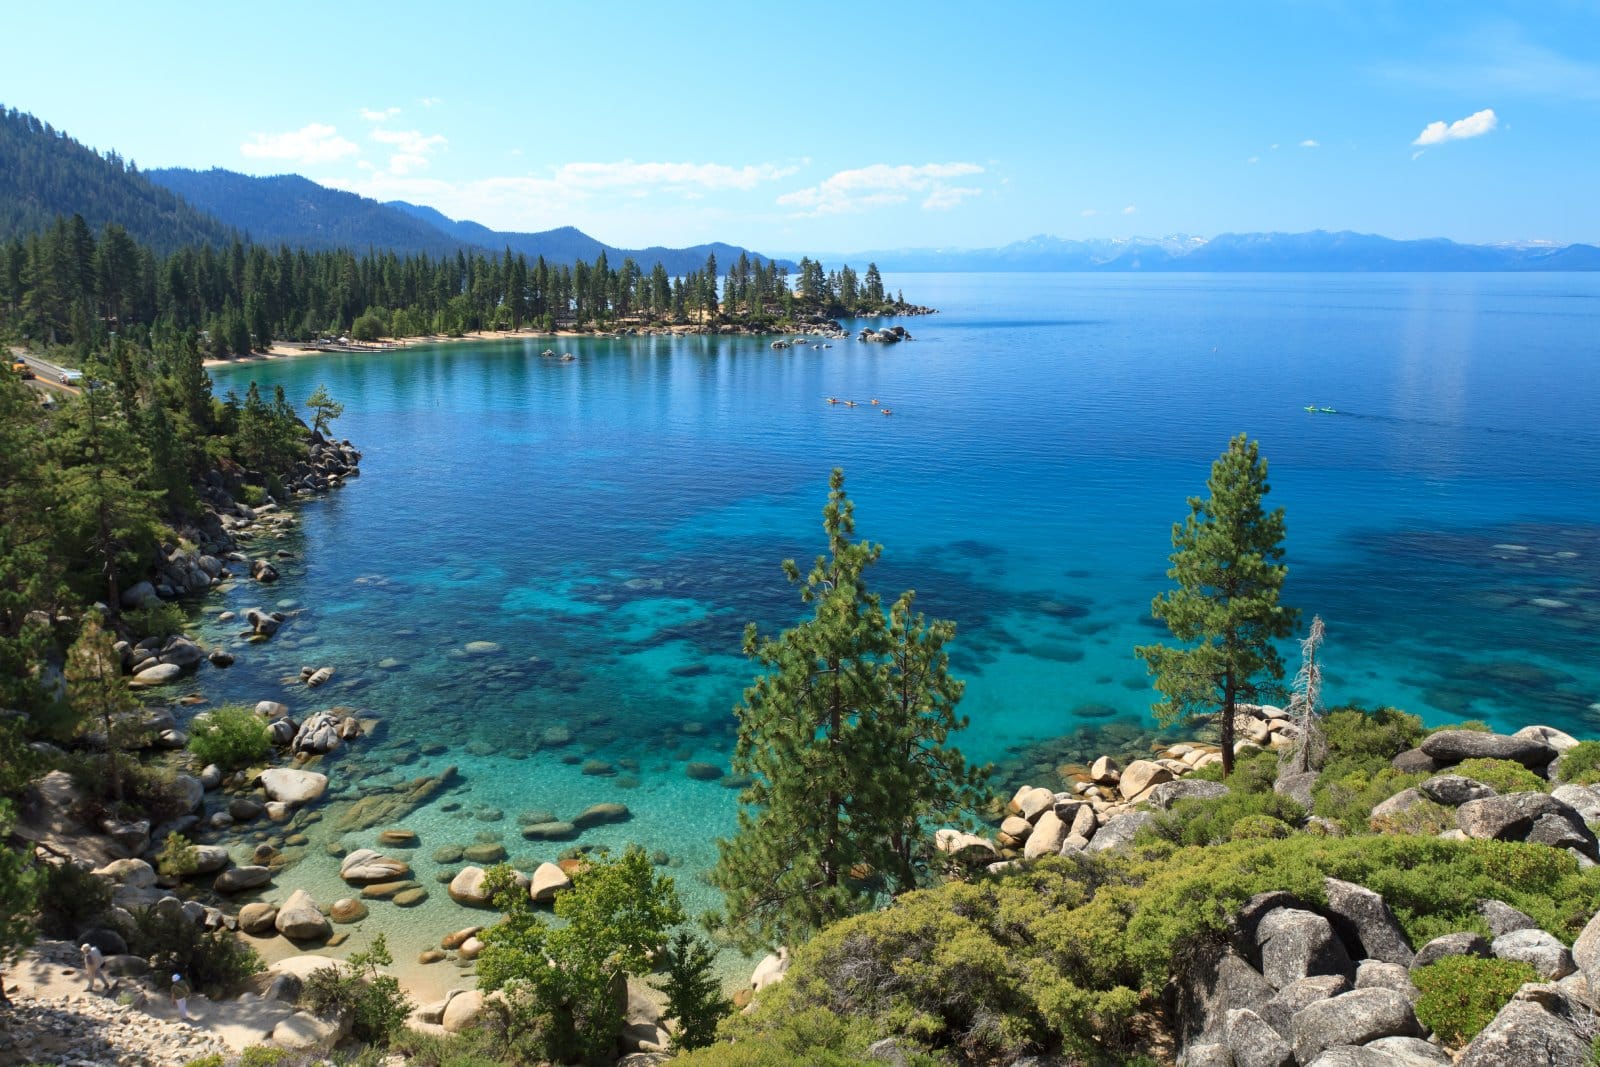 <p class="wp-caption-text">Image Credit: Shutterstock / topseller</p>  <p><span><strong>Depth:</strong> 1,645 feet</span> <span>Lake Tahoe mesmerizes with its clear blue waters and mountainous surroundings, offering skiing, kayaking, and scenic cruises.</span></p>